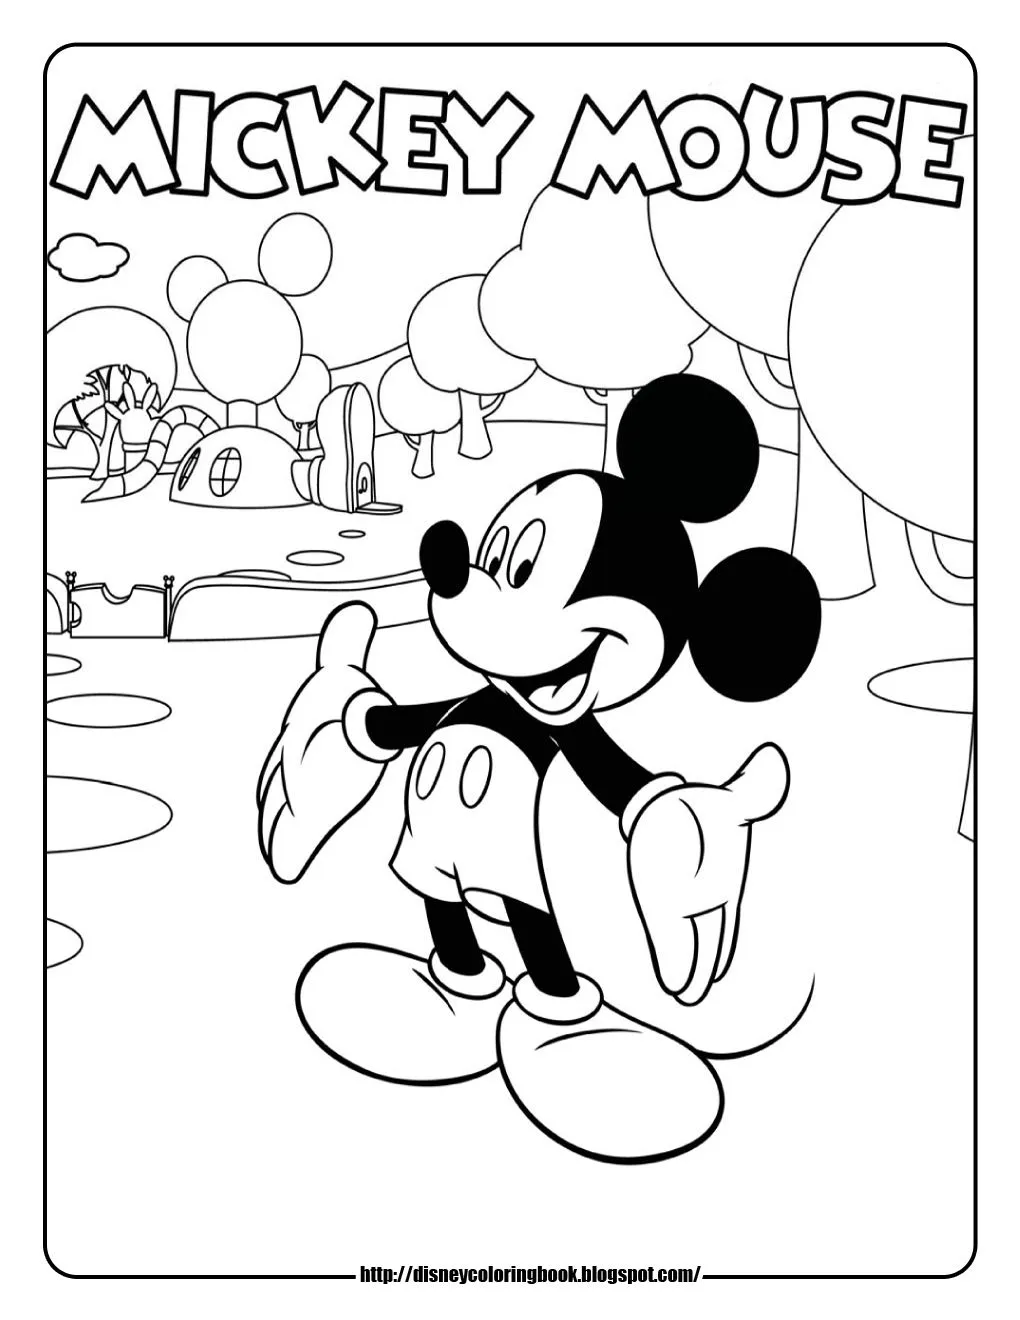 Mickey Mouse Clubhouse 1: Free Disney Coloring Sheets | Learn To ...